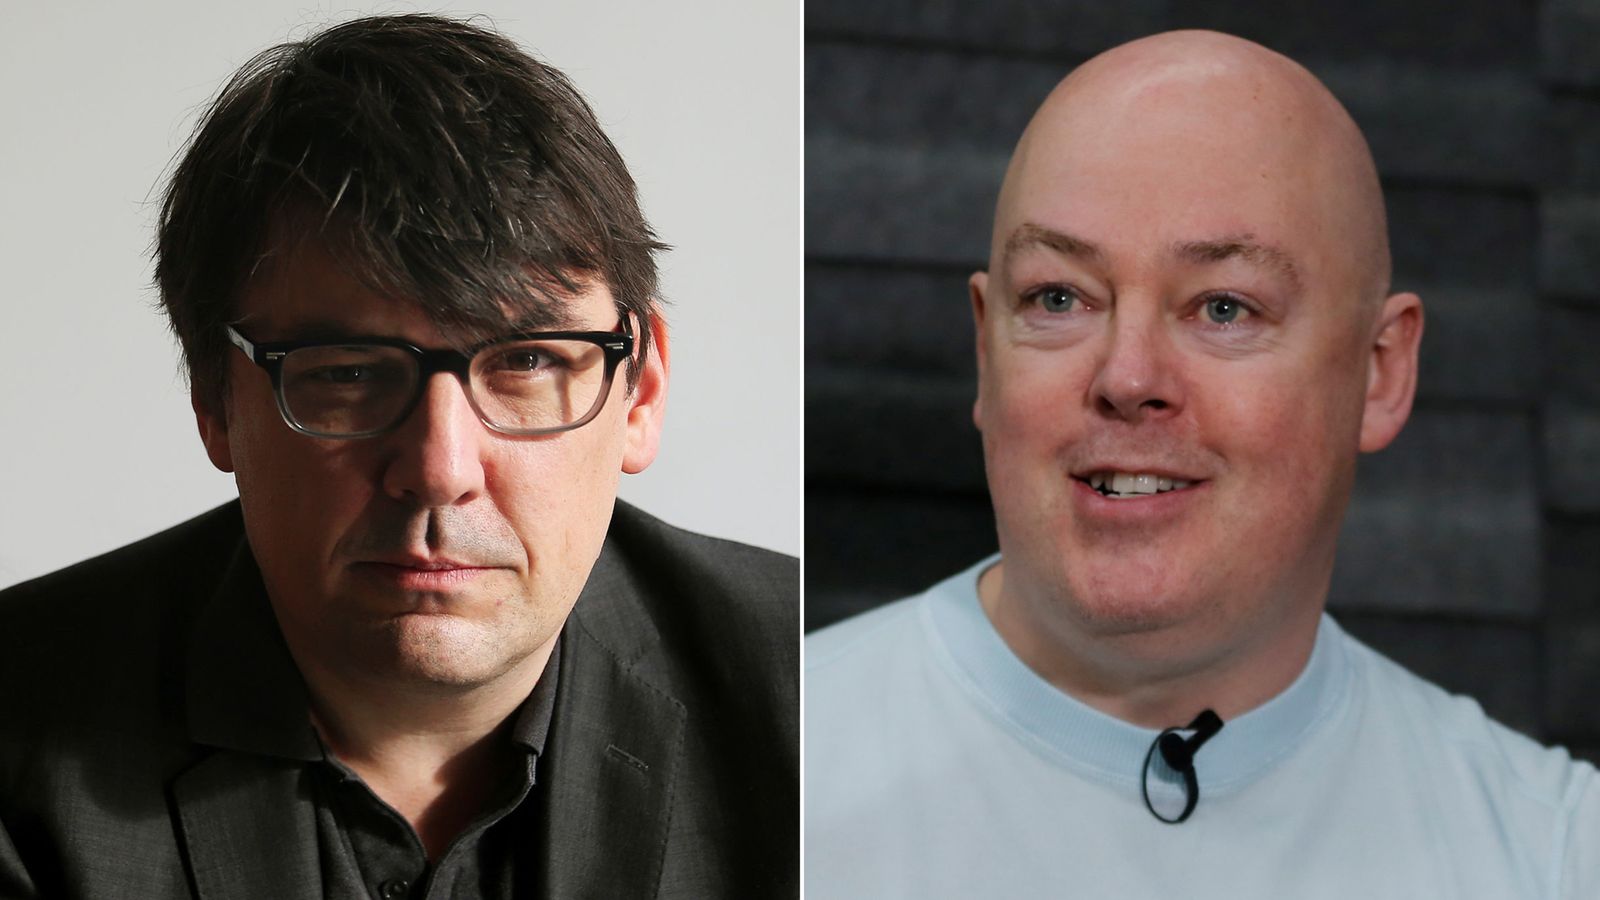 Author John Boyne apologises to Father Ted writer Graham Linehan over stance on trans issues: ‘You were right, I was wrong’